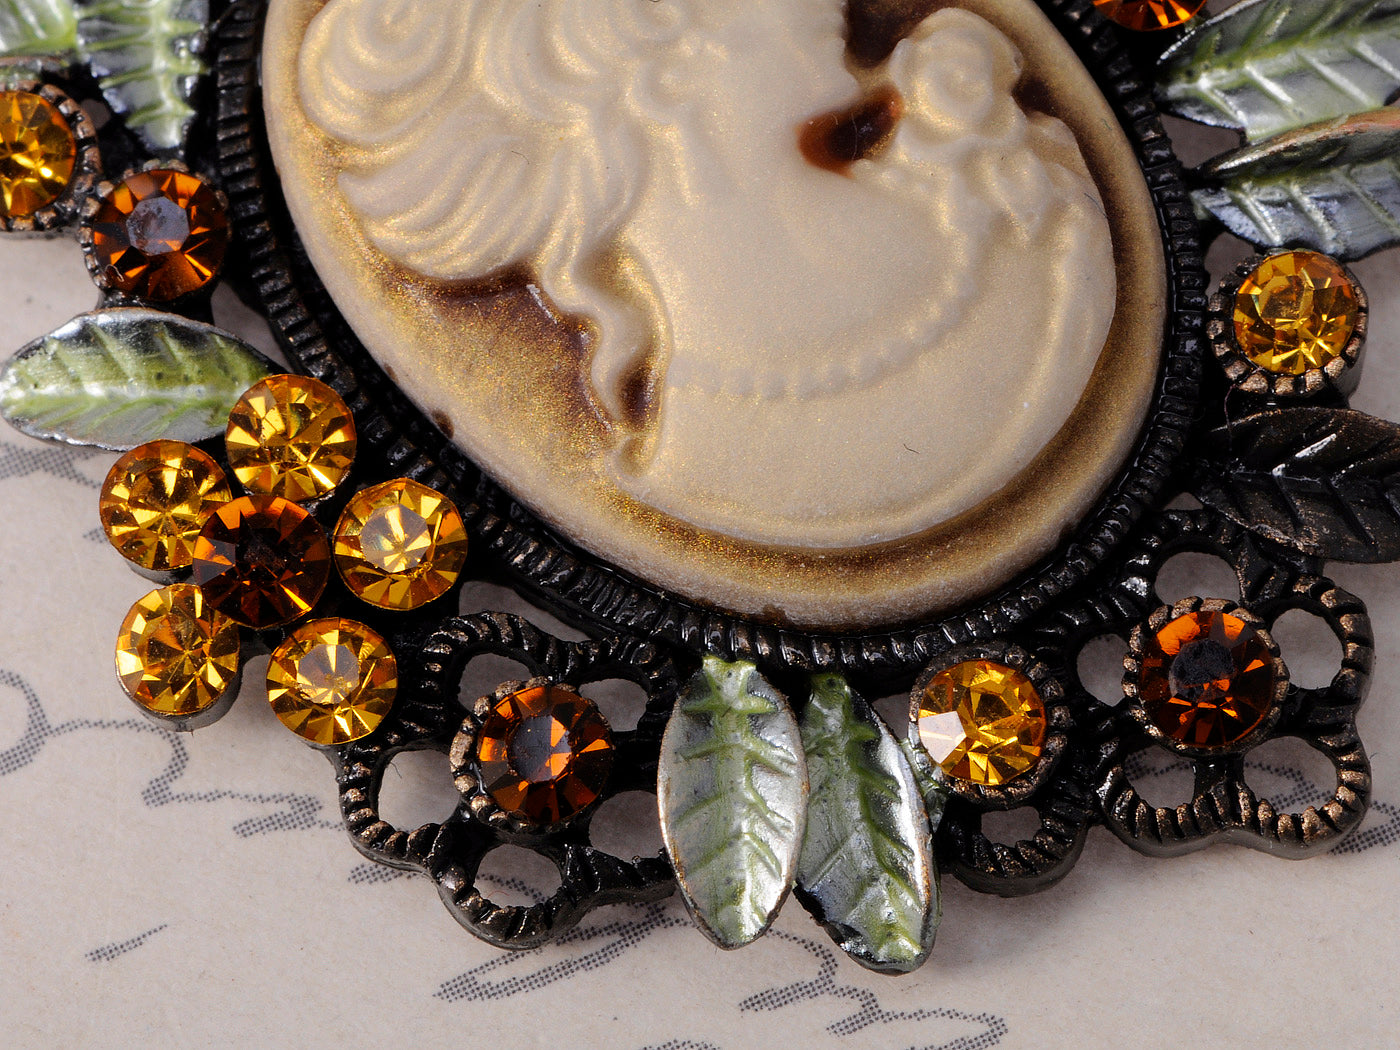 Vintage Reproduction Floral Cameo Maid Necklace Pendant